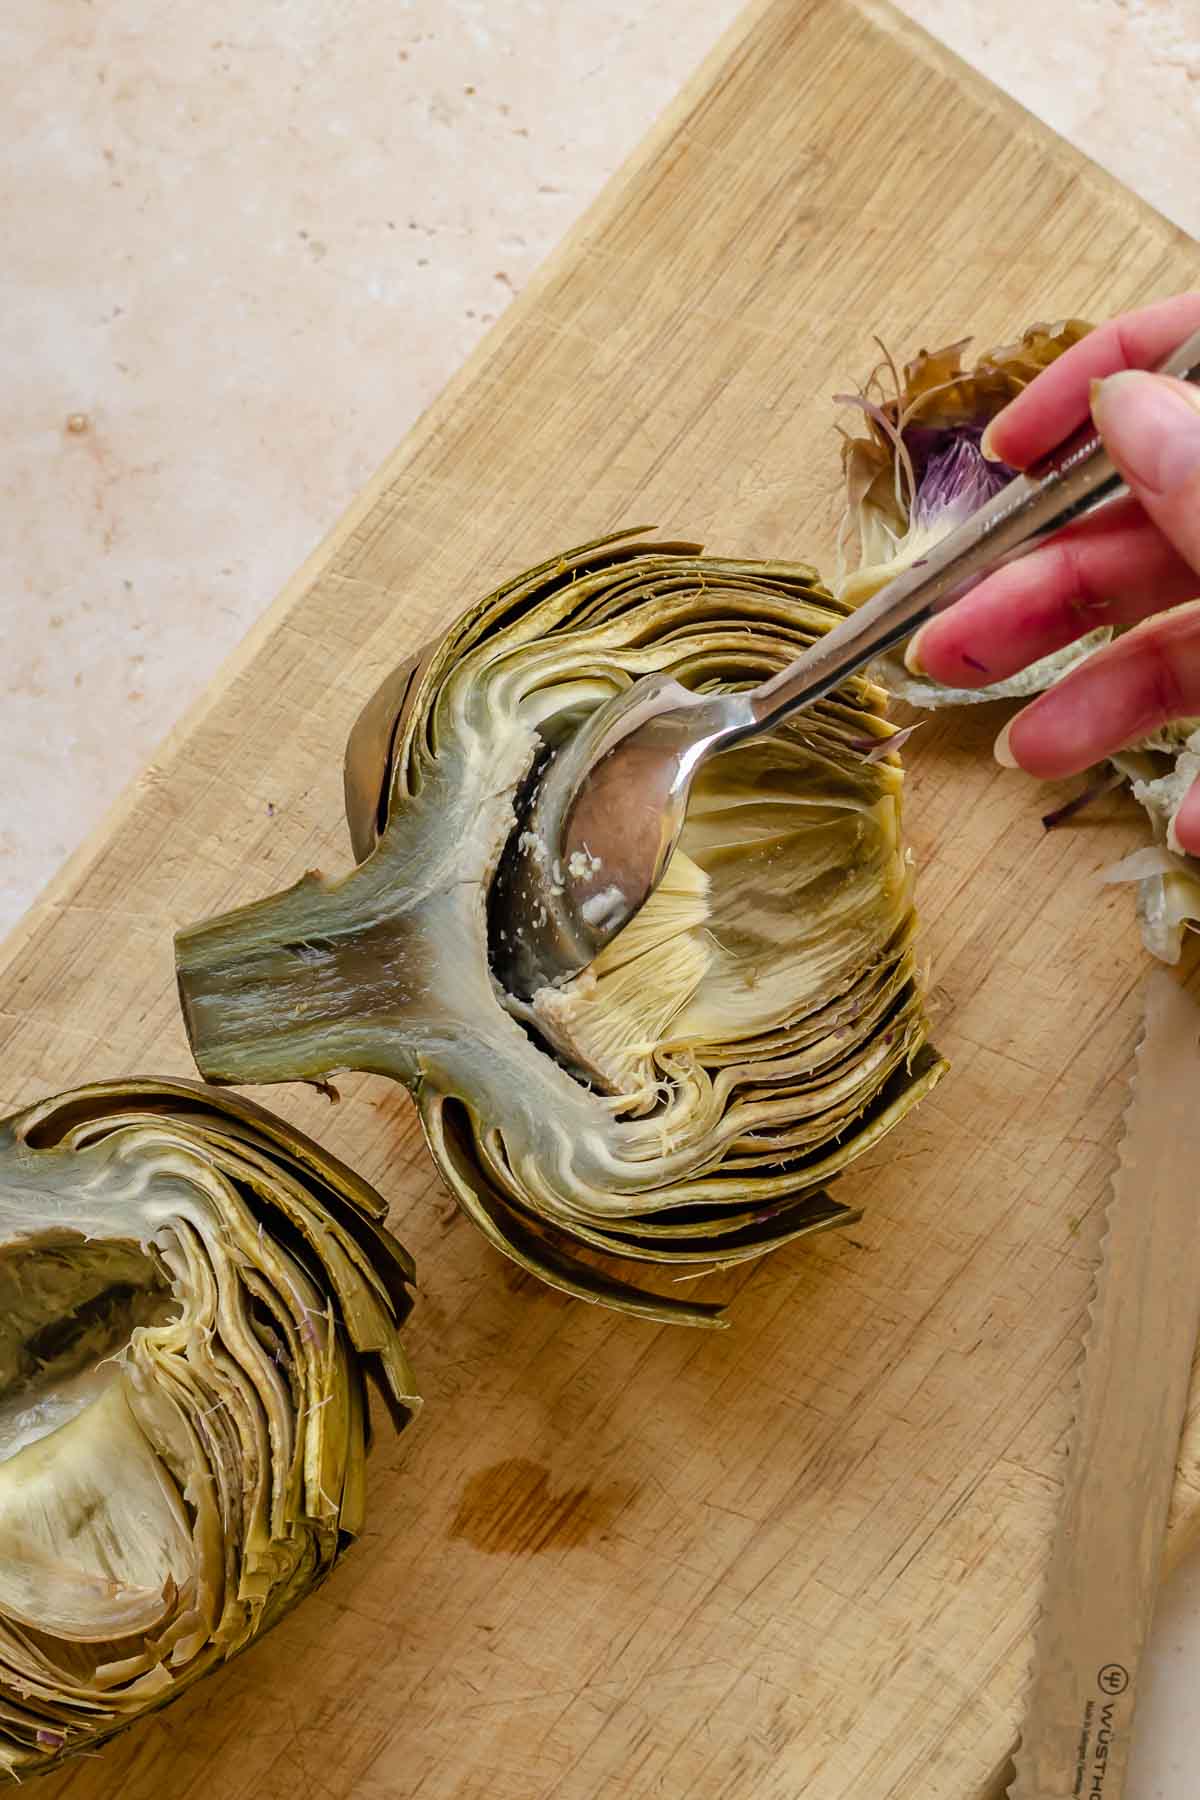 A spoon removes the choke from half of a steamed artichoke.